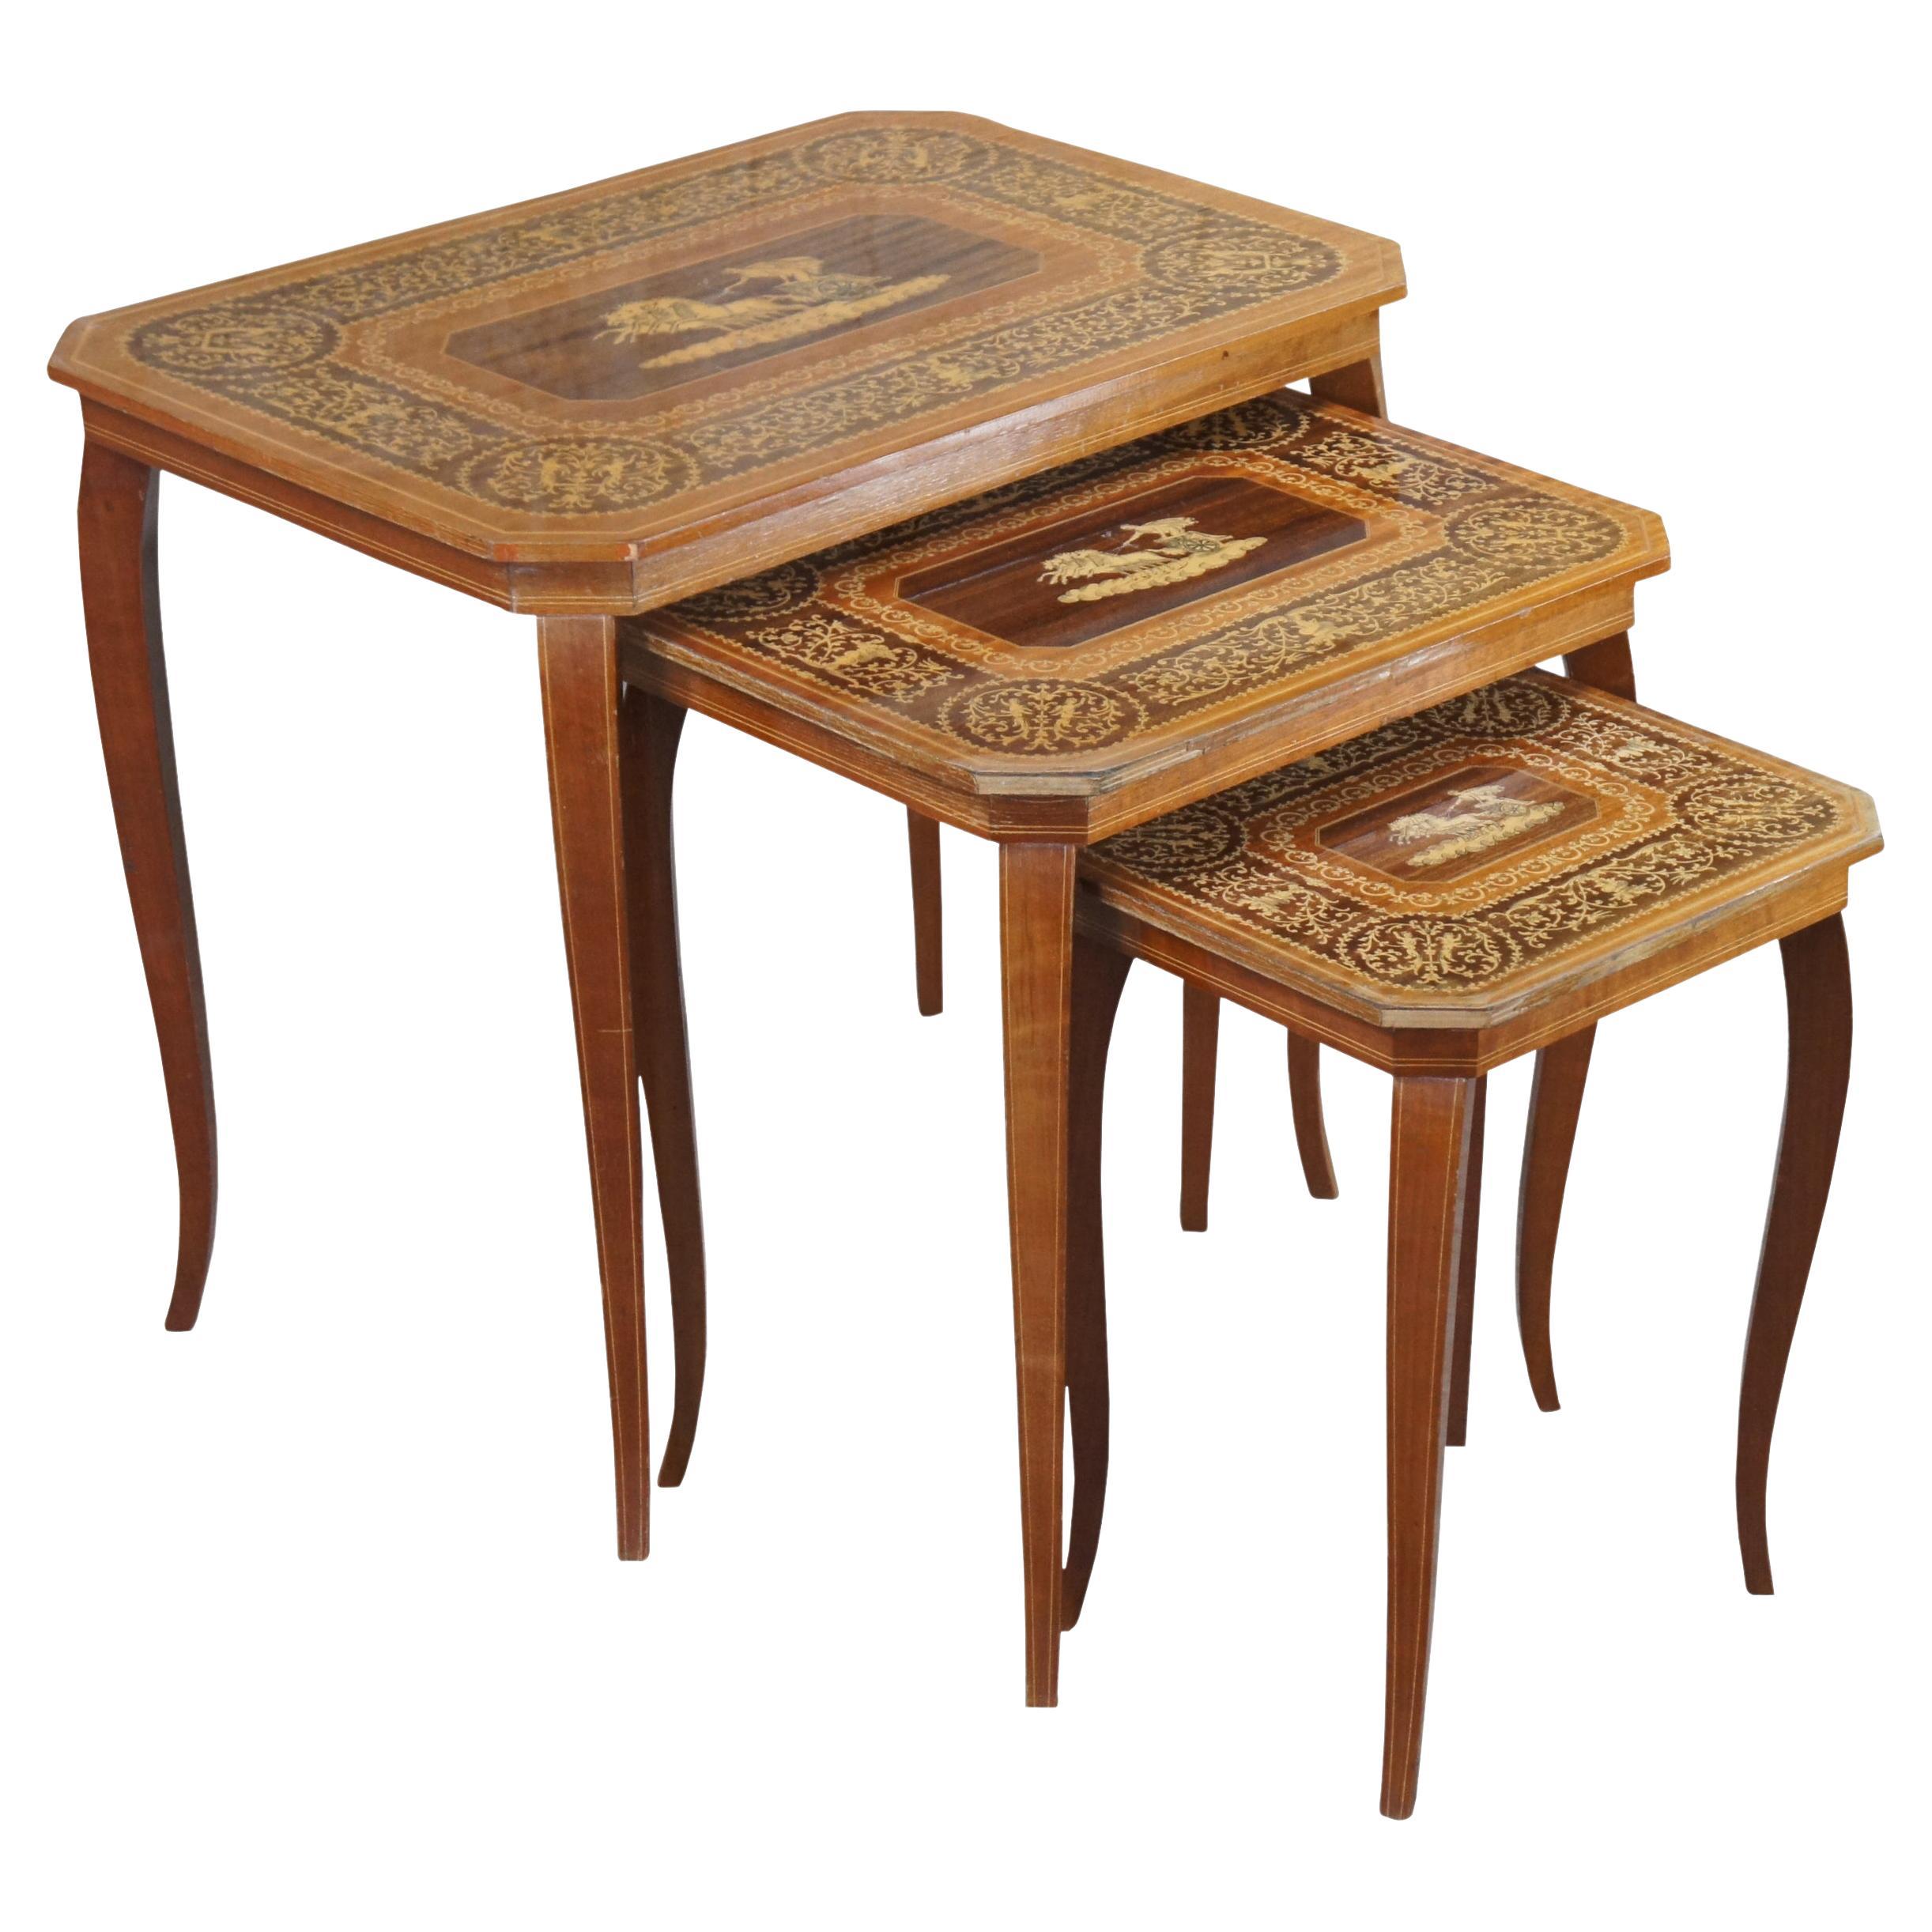 3 Vintage Inlaid Satinwood Italian Neo-Grec Neoclassical Nesting Side Tables